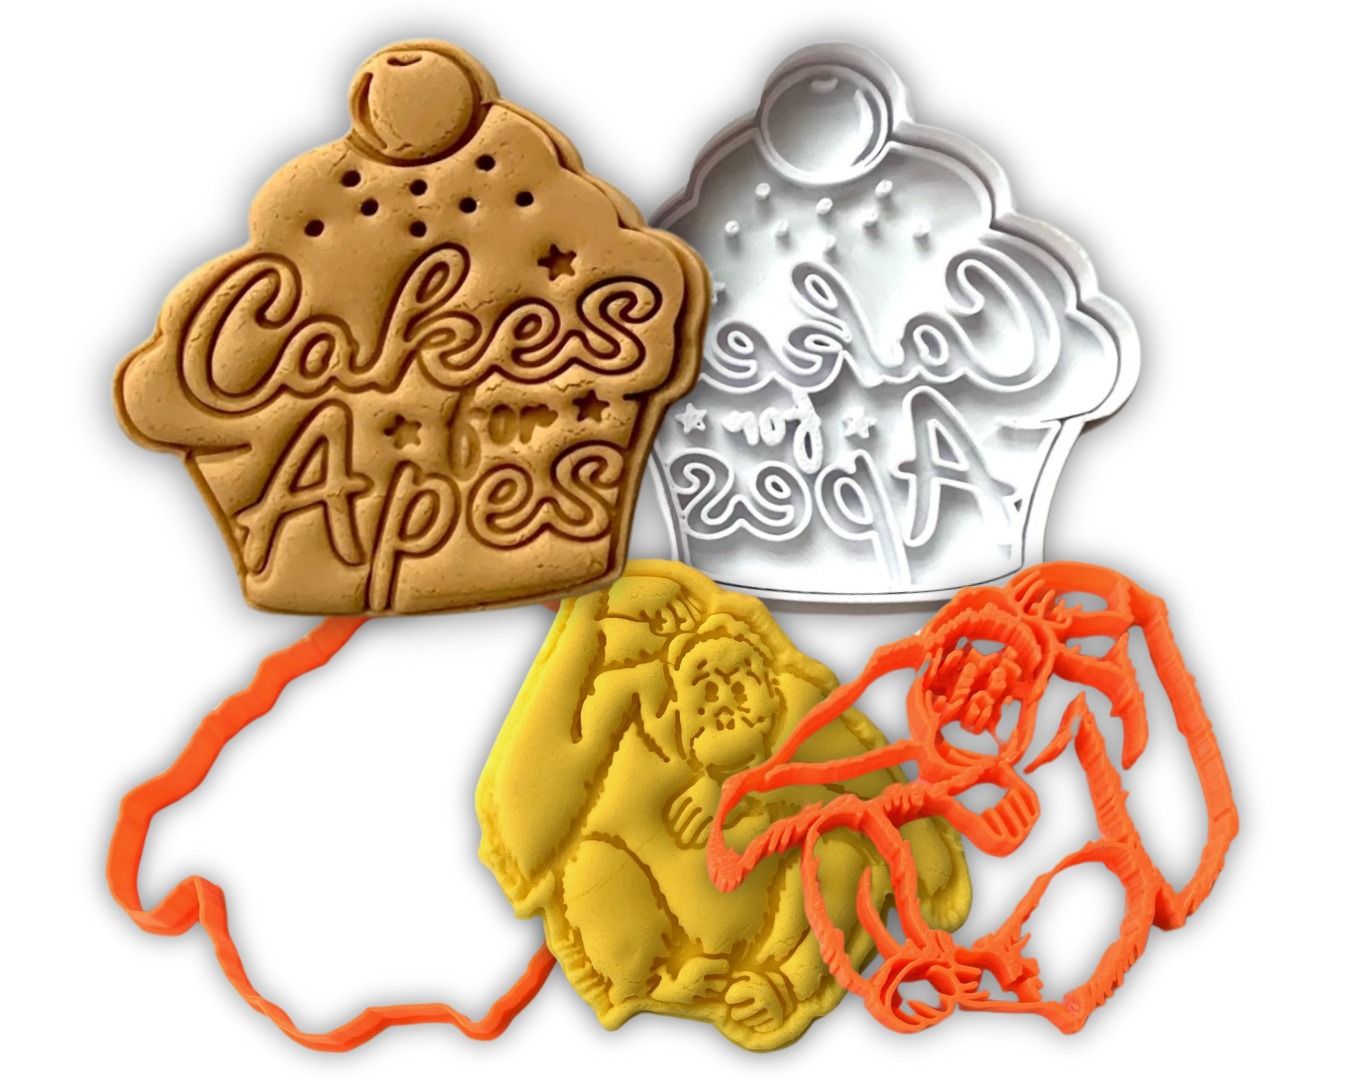 Cakes for Apes Cookie Cutters